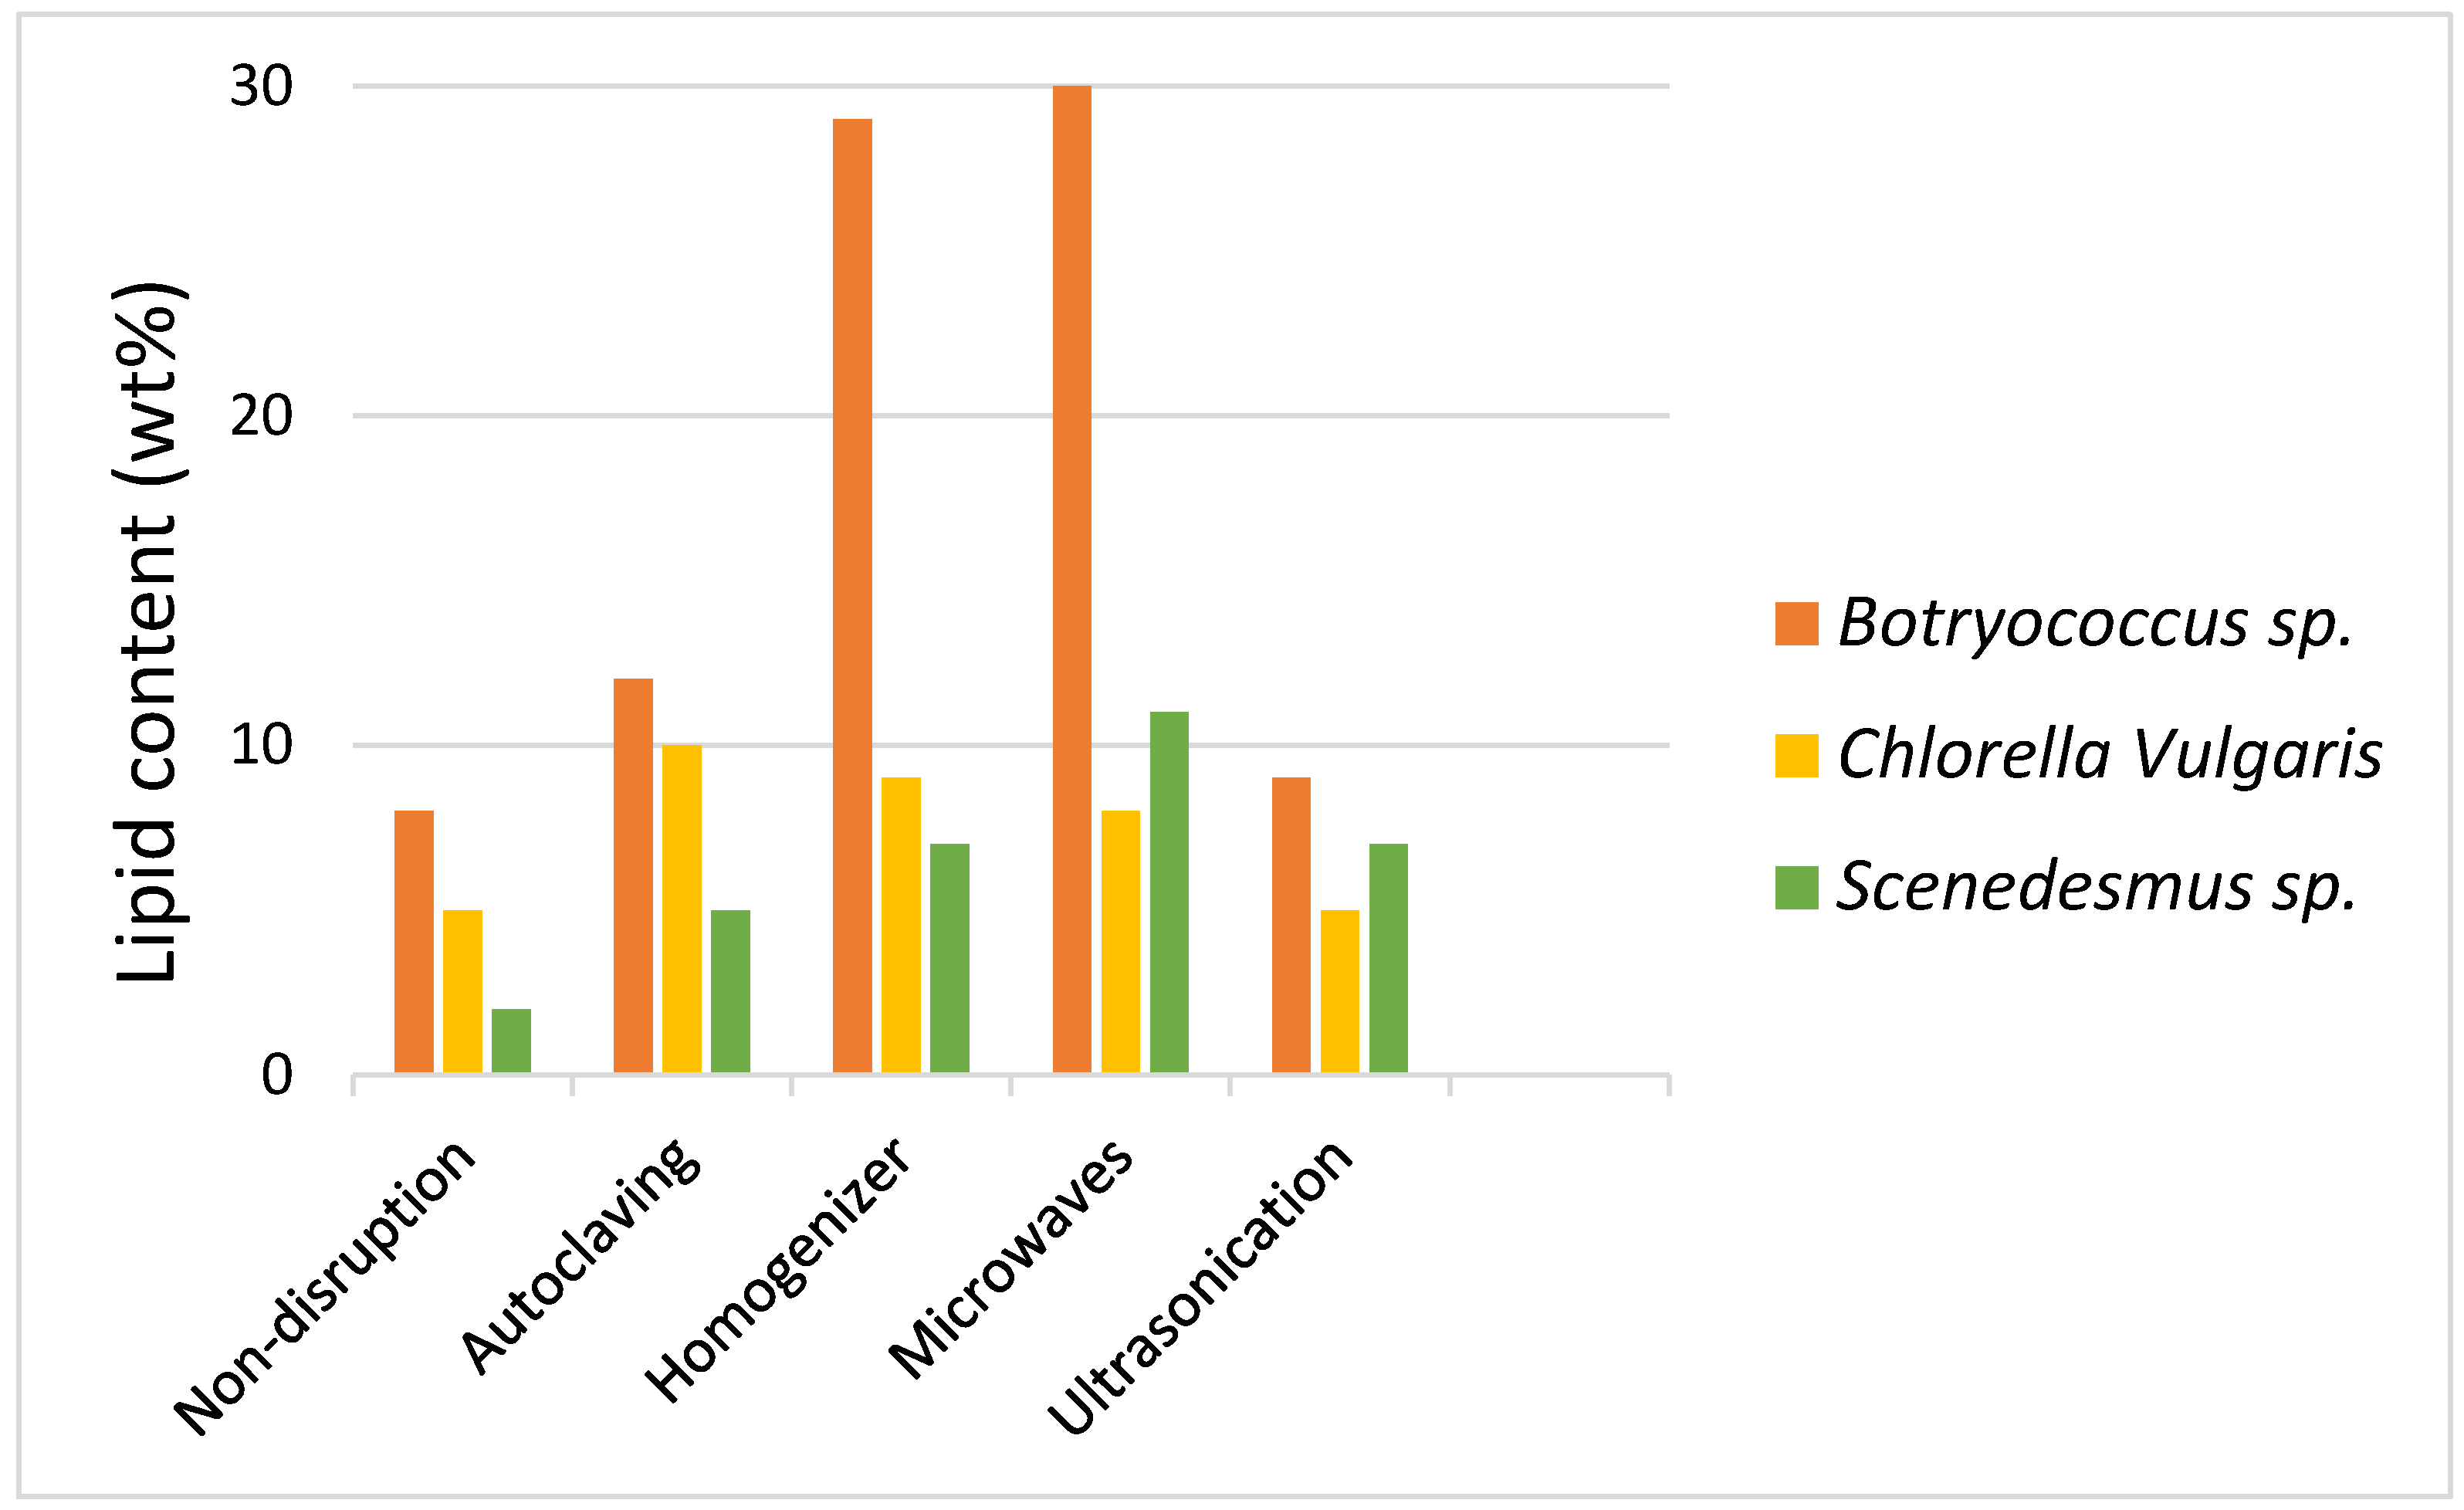 https://pub.mdpi-res.com/sustainability/sustainability-14-09953/article_deploy/html/images/sustainability-14-09953-g008.png?1660809701